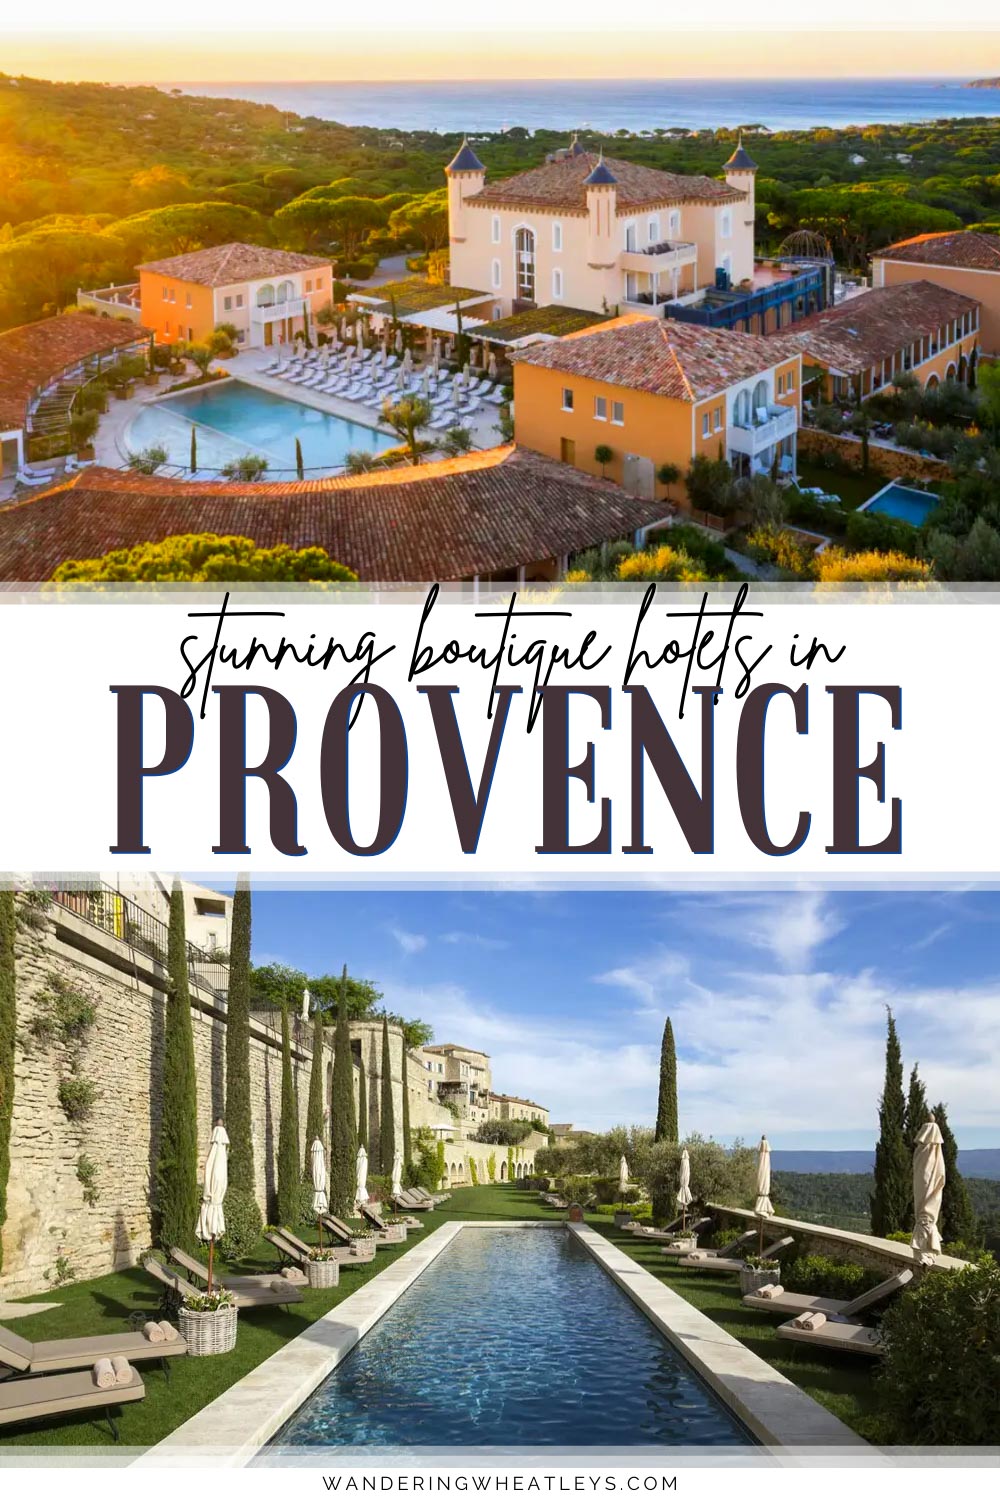 Best Boutique Hotels in Provence